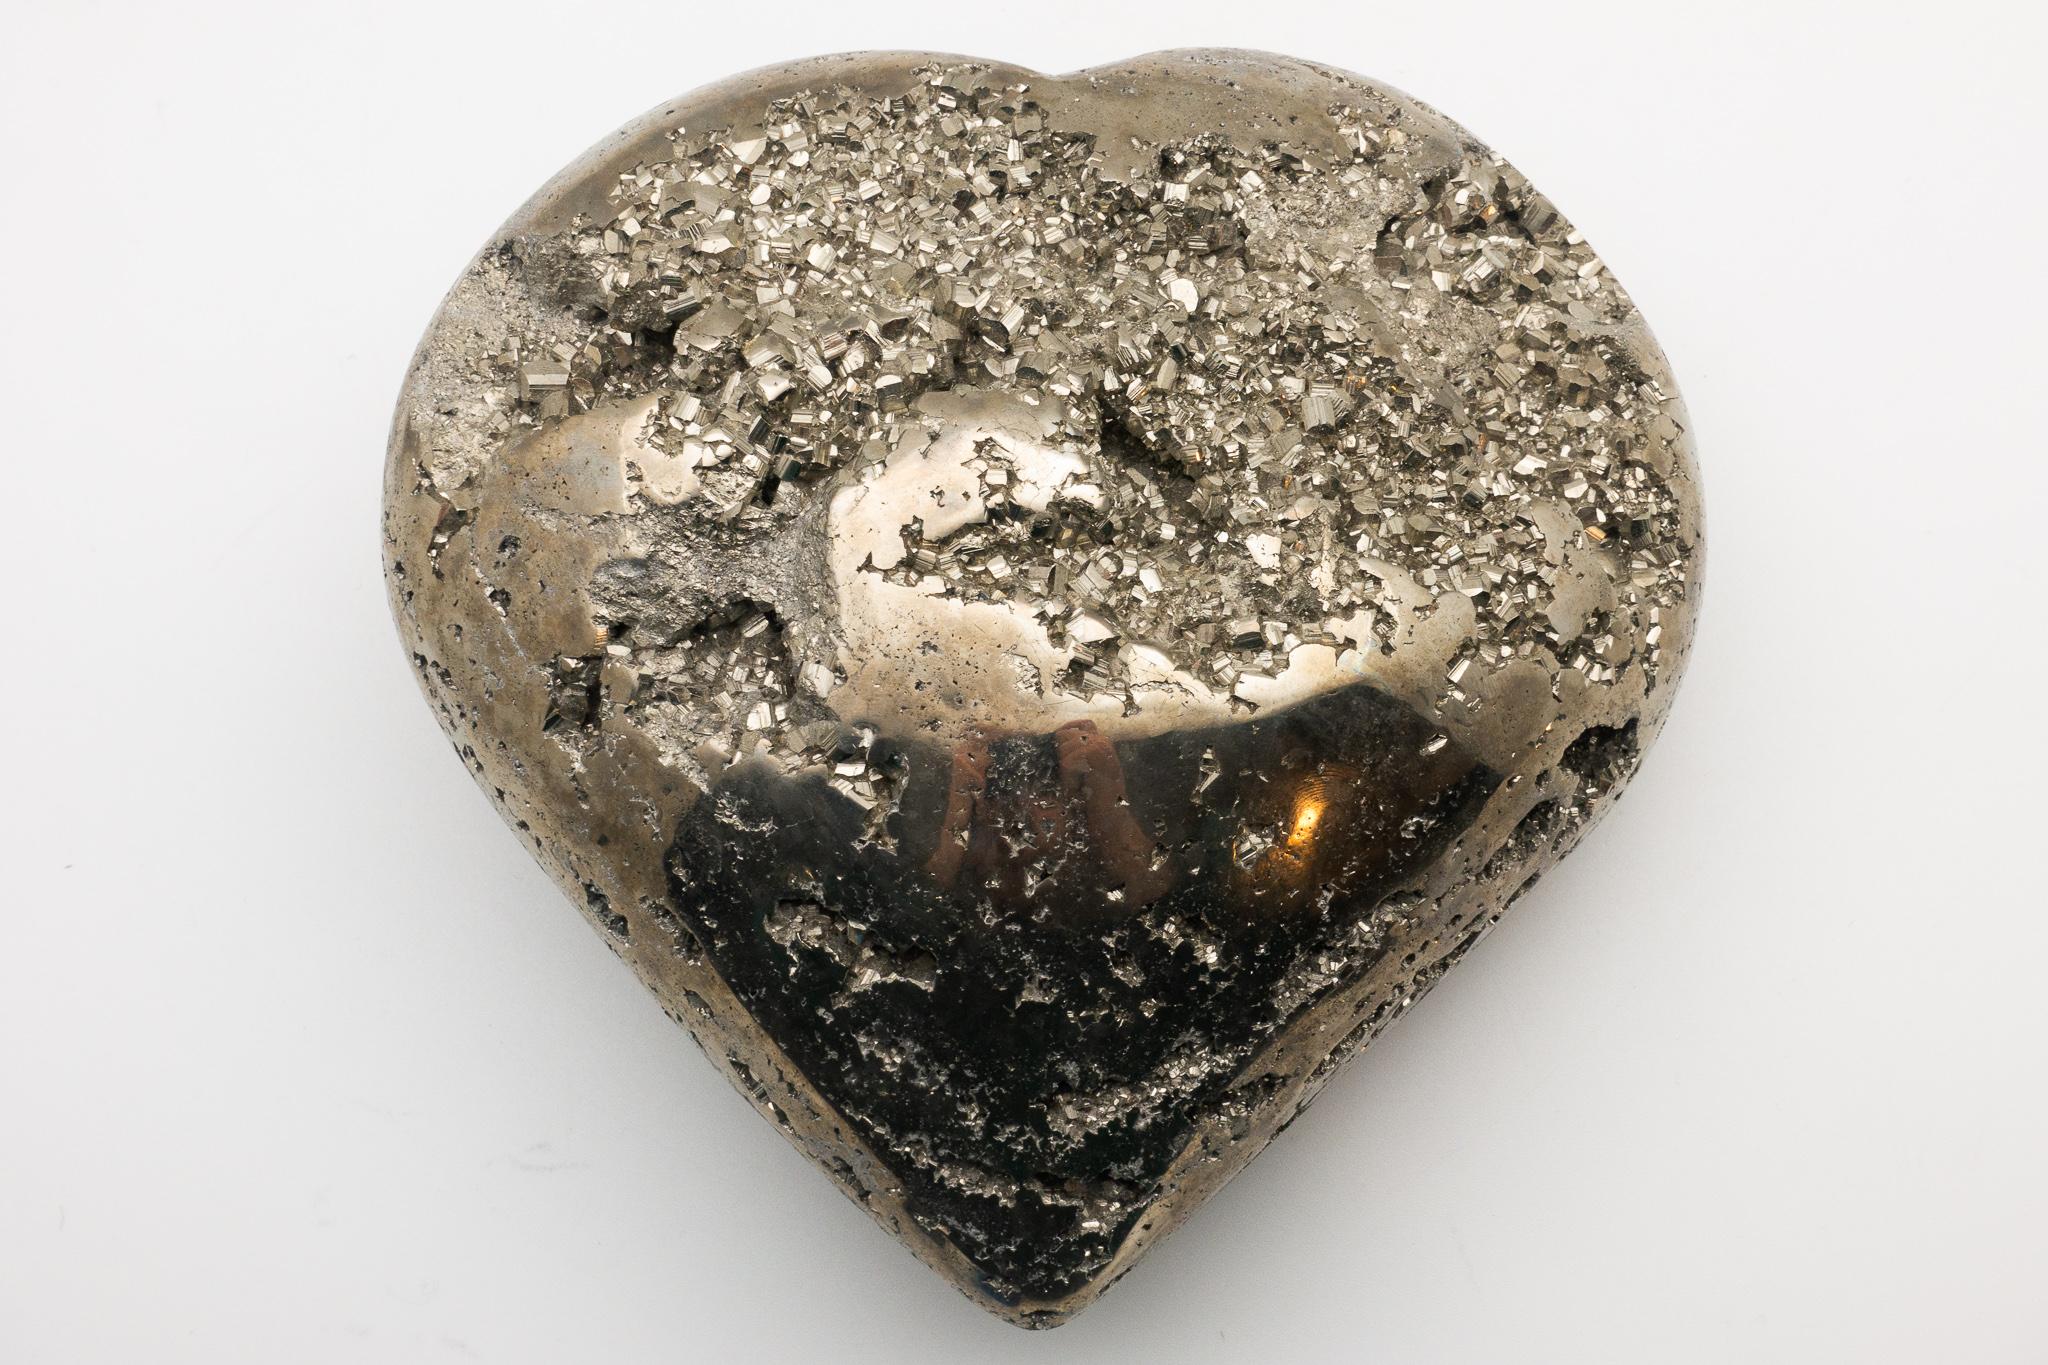 Beautifully carved extra large pyrite specimen from Peru. Pyrite is a symbol of prosperity and good luck. The ideal gift for Valentines Day- Love, prosperity and good luck.